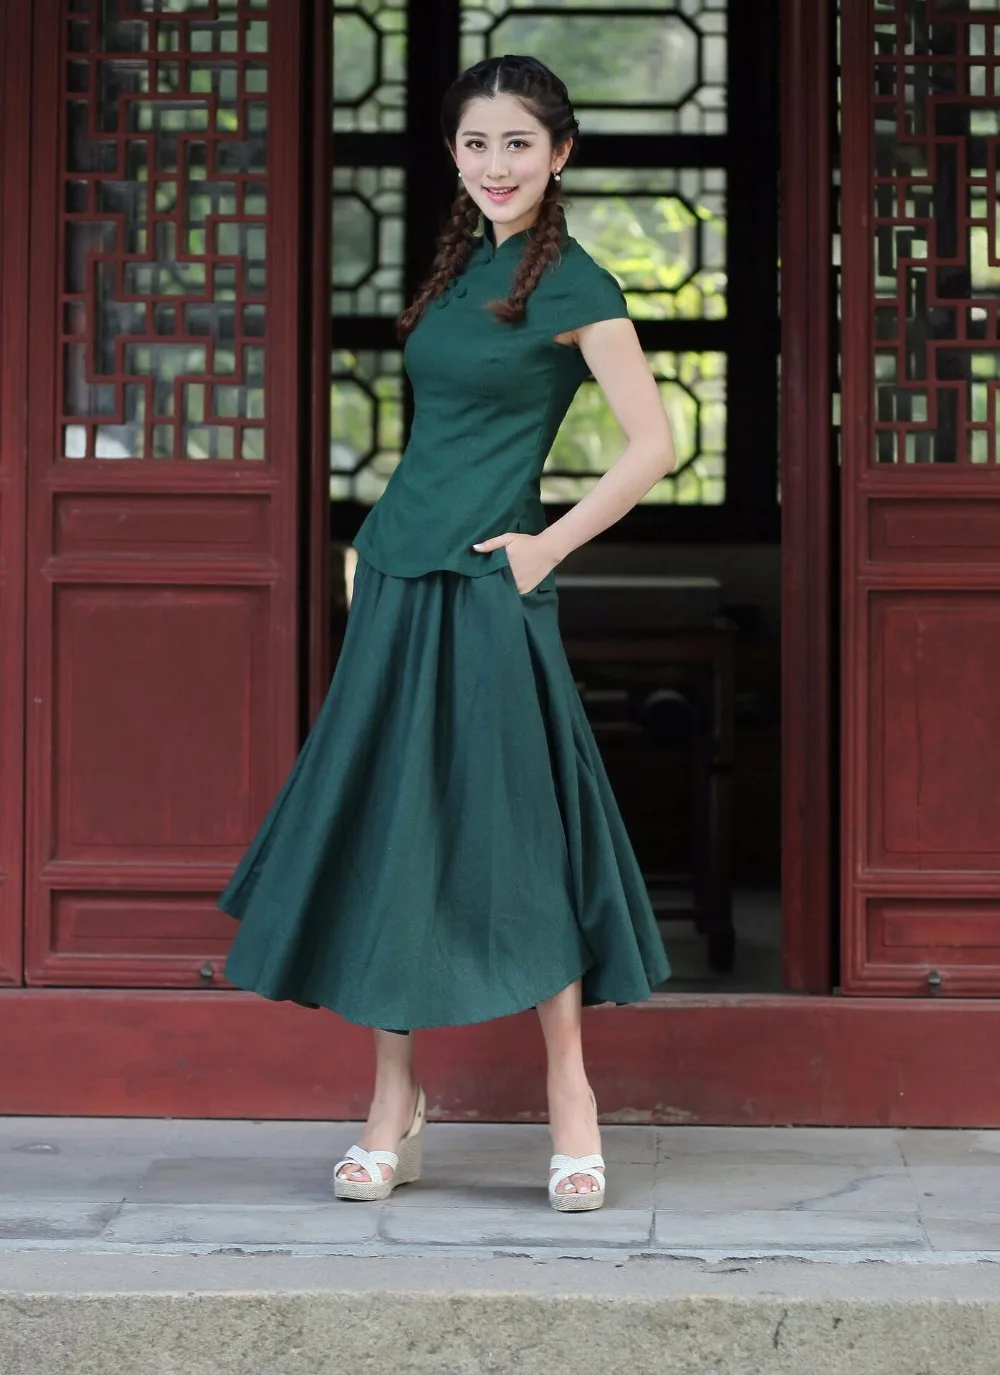 Image New Arrival Green Chinese Women s Shirt Skirts Sets Cotton Linen Tang Suit Clothing Size S M L XL XXL XXXL 2518 7